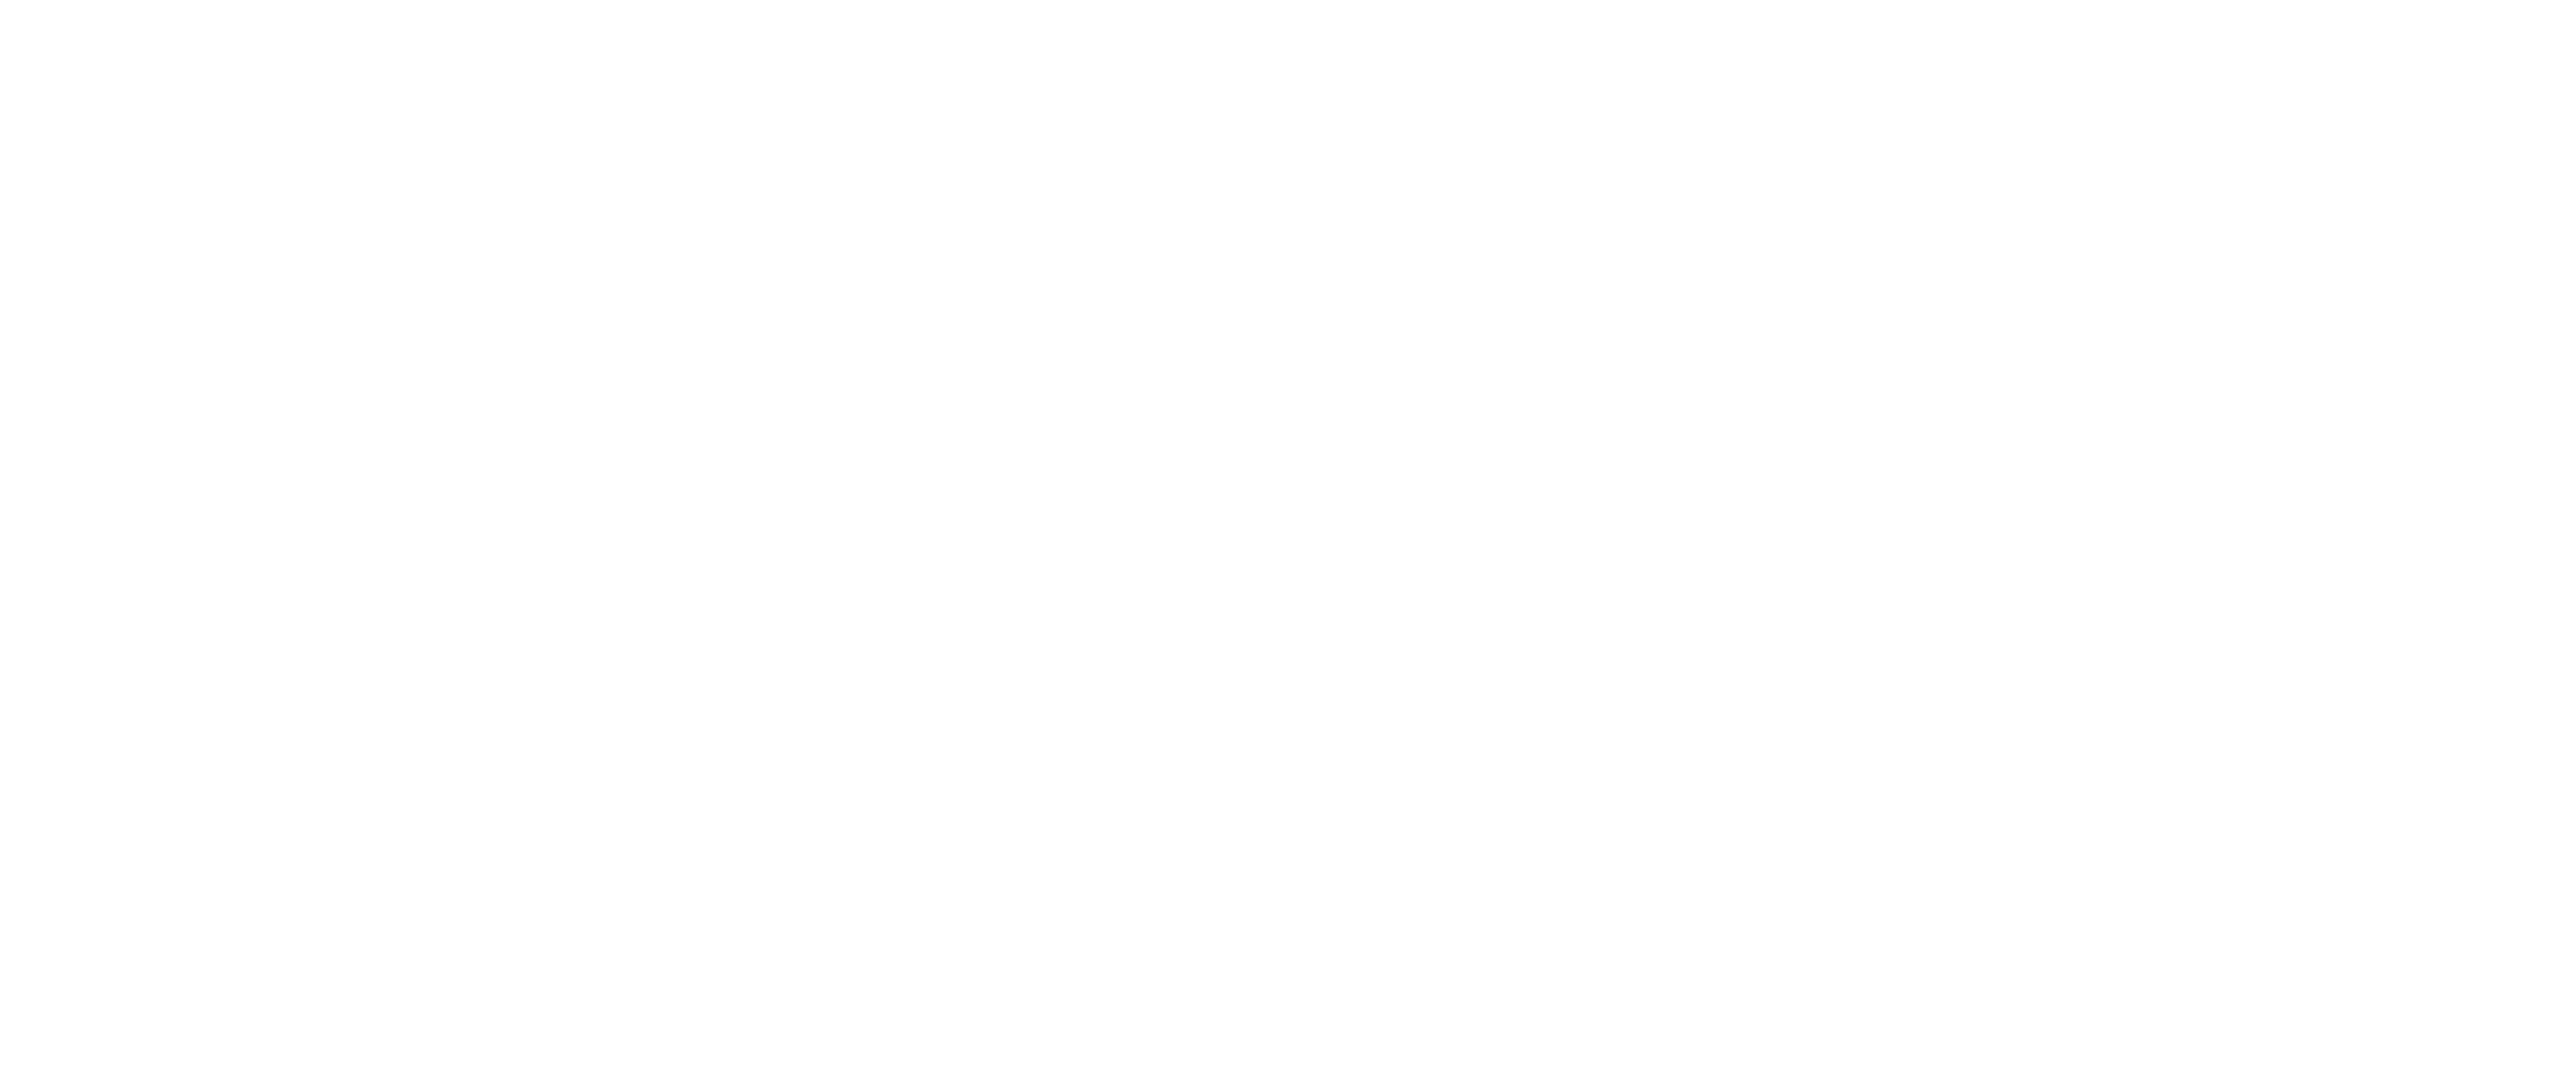 SEE Conference